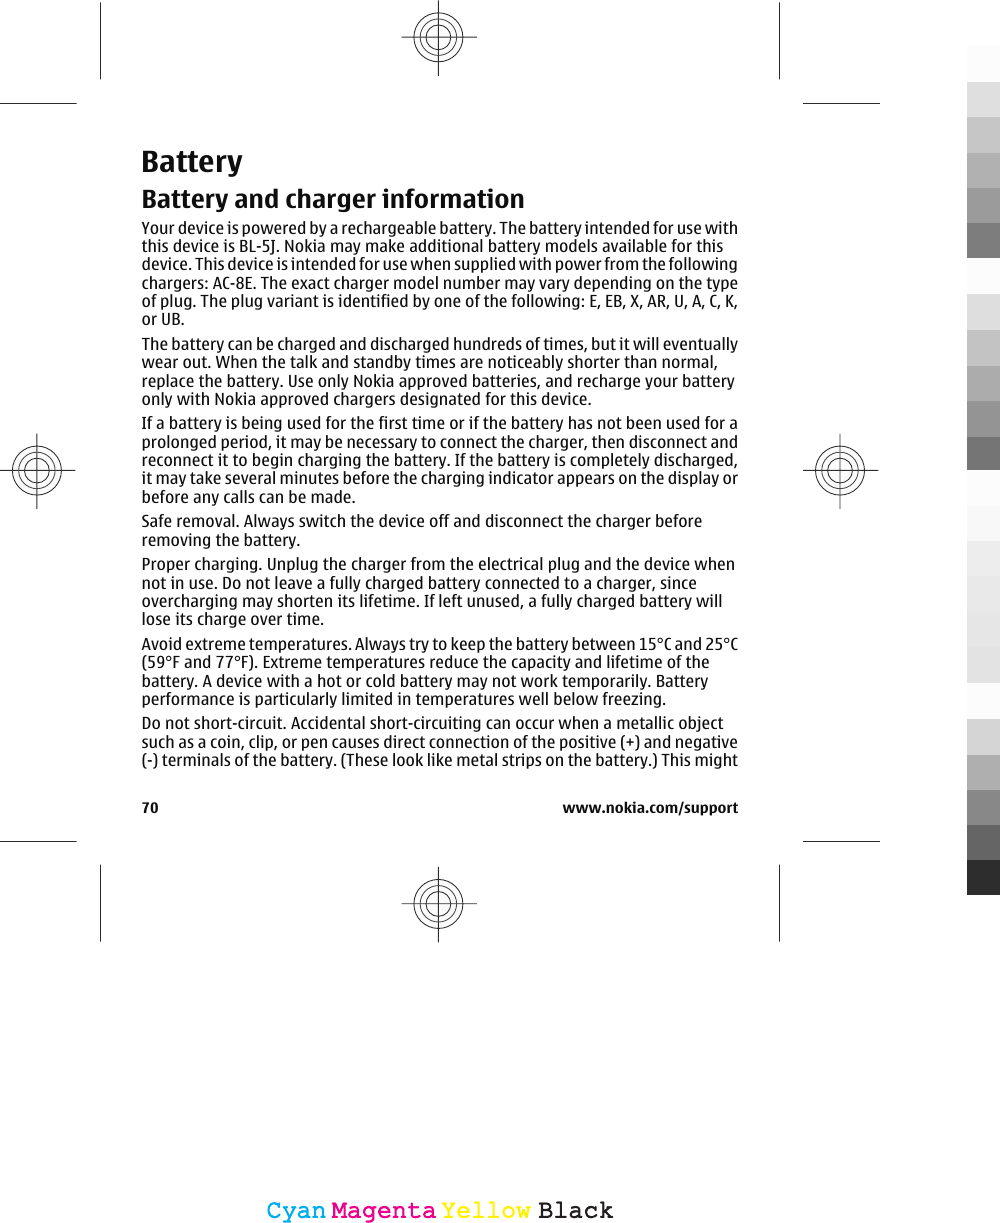 BatteryBattery and charger informationYour device is powered by a rechargeable battery. The battery intended for use withthis device is BL-5J. Nokia may make additional battery models available for thisdevice. This device is intended for use when supplied with power from the followingchargers: AC-8E. The exact charger model number may vary depending on the typeof plug. The plug variant is identified by one of the following: E, EB, X, AR, U, A, C, K,or UB.The battery can be charged and discharged hundreds of times, but it will eventuallywear out. When the talk and standby times are noticeably shorter than normal,replace the battery. Use only Nokia approved batteries, and recharge your batteryonly with Nokia approved chargers designated for this device.If a battery is being used for the first time or if the battery has not been used for aprolonged period, it may be necessary to connect the charger, then disconnect andreconnect it to begin charging the battery. If the battery is completely discharged,it may take several minutes before the charging indicator appears on the display orbefore any calls can be made.Safe removal. Always switch the device off and disconnect the charger beforeremoving the battery.Proper charging. Unplug the charger from the electrical plug and the device whennot in use. Do not leave a fully charged battery connected to a charger, sinceovercharging may shorten its lifetime. If left unused, a fully charged battery willlose its charge over time.Avoid extreme temperatures. Always try to keep the battery between 15°C and 25°C(59°F and 77°F). Extreme temperatures reduce the capacity and lifetime of thebattery. A device with a hot or cold battery may not work temporarily. Batteryperformance is particularly limited in temperatures well below freezing.Do not short-circuit. Accidental short-circuiting can occur when a metallic objectsuch as a coin, clip, or pen causes direct connection of the positive (+) and negative(-) terminals of the battery. (These look like metal strips on the battery.) This might70 www.nokia.com/supportCyanCyanMagentaMagentaYellowYellowBlackBlack